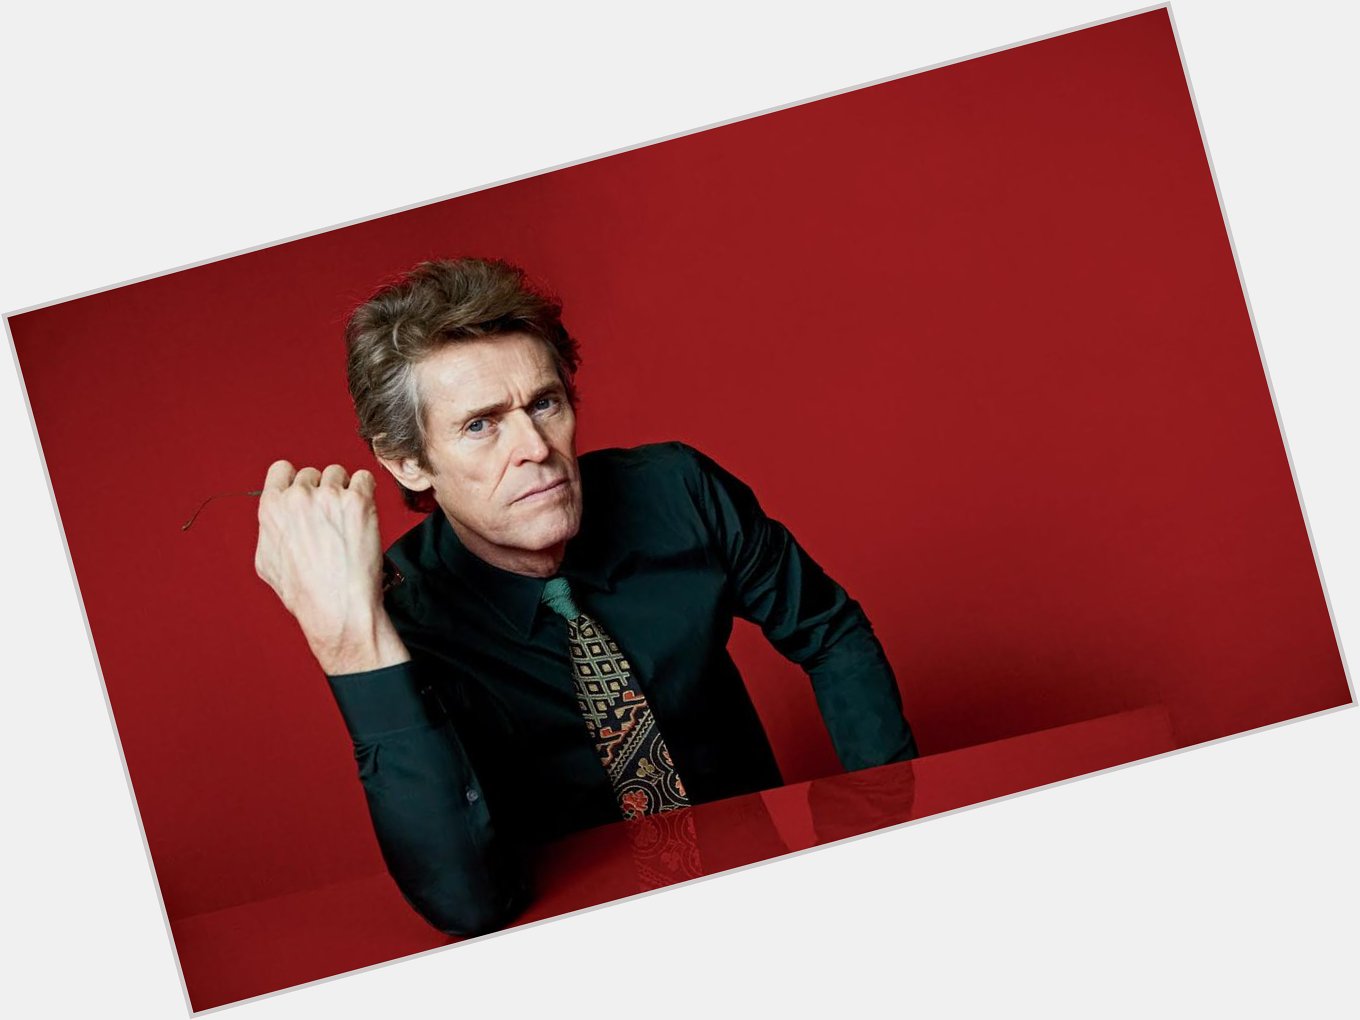 American actor and thespian Willem Dafoe turns 65 today. Happy     